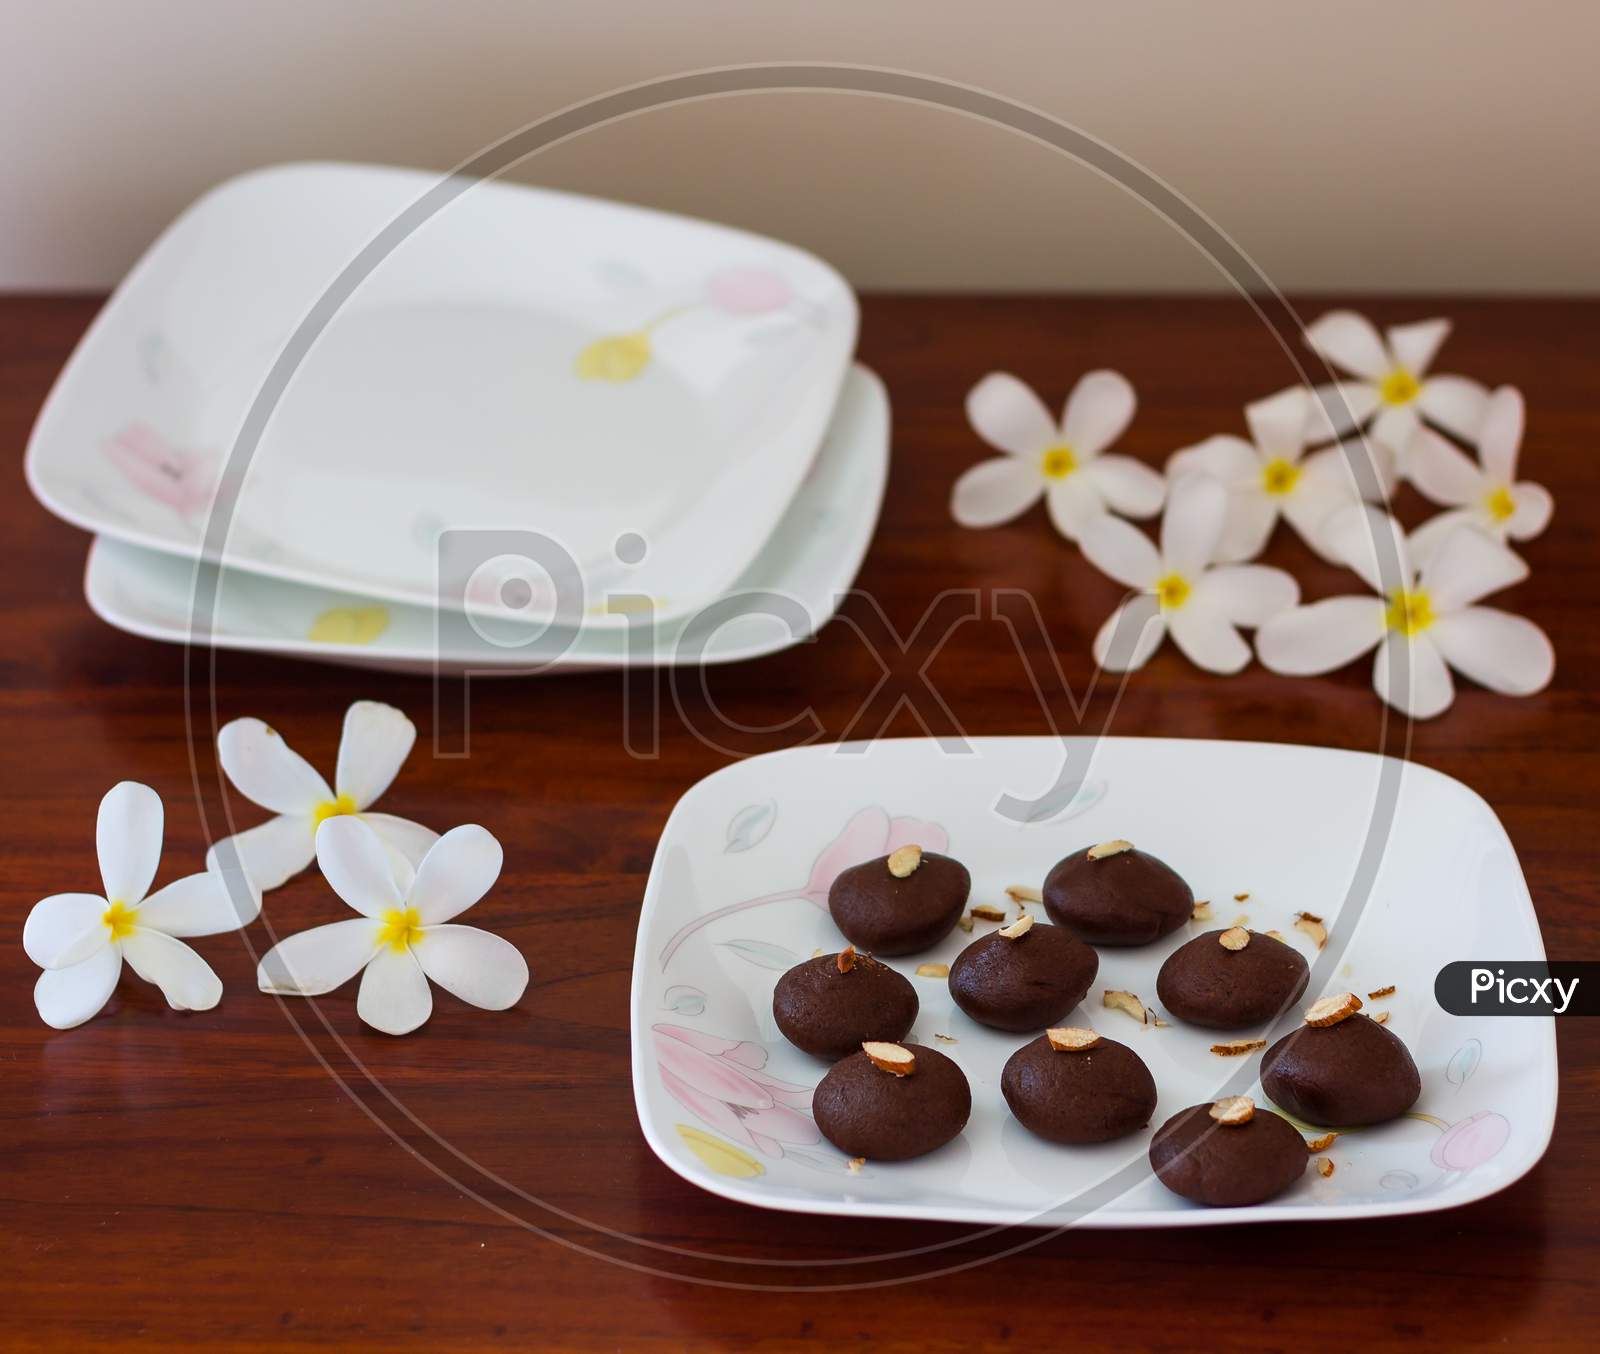 Selective focus on Dark Chocolate truffle or cocoa balls or pralines or candies,isolated on dark background,blur background.Also an Indian dessert called chocolate peda,pedha made during Dussehra.